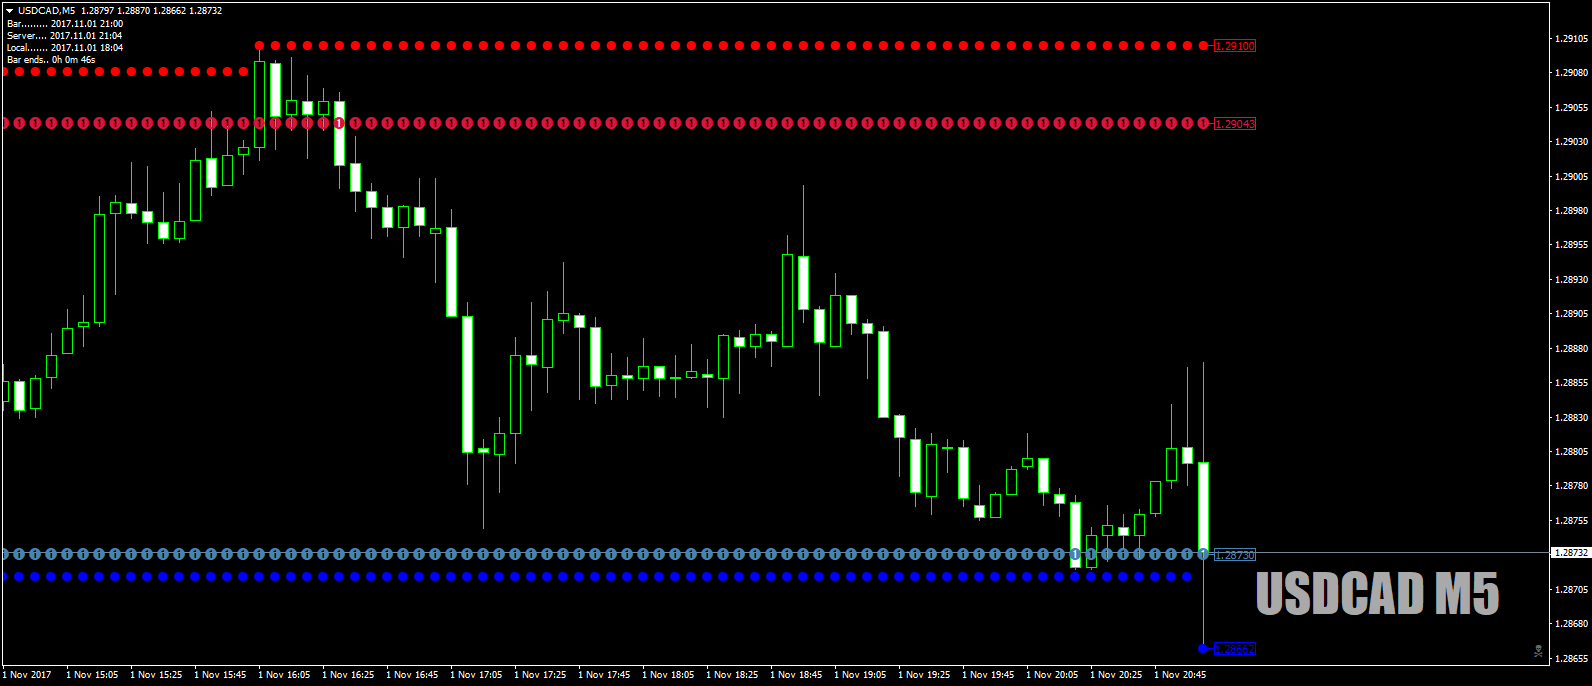 USDCADM5asHOLOin-and-out1stNov17.png